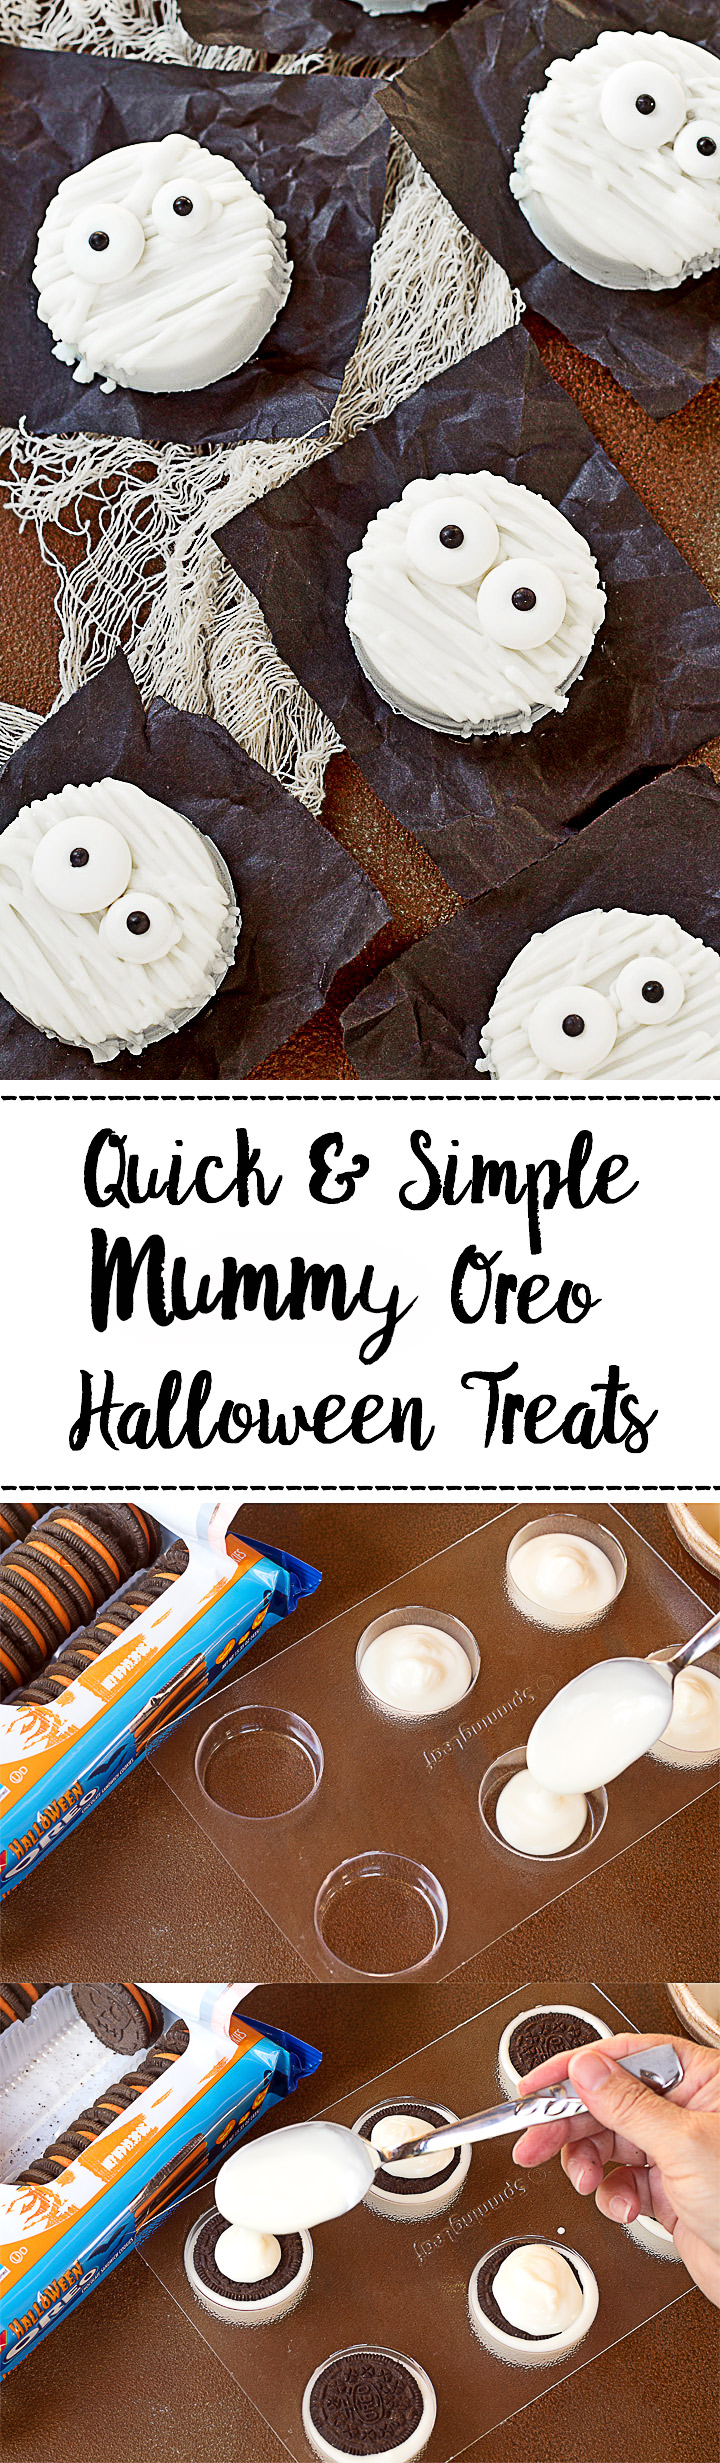 Decorated Chocolate Covered Mummy Oreo Tutorial for Halloween | The Bearfoot Baker